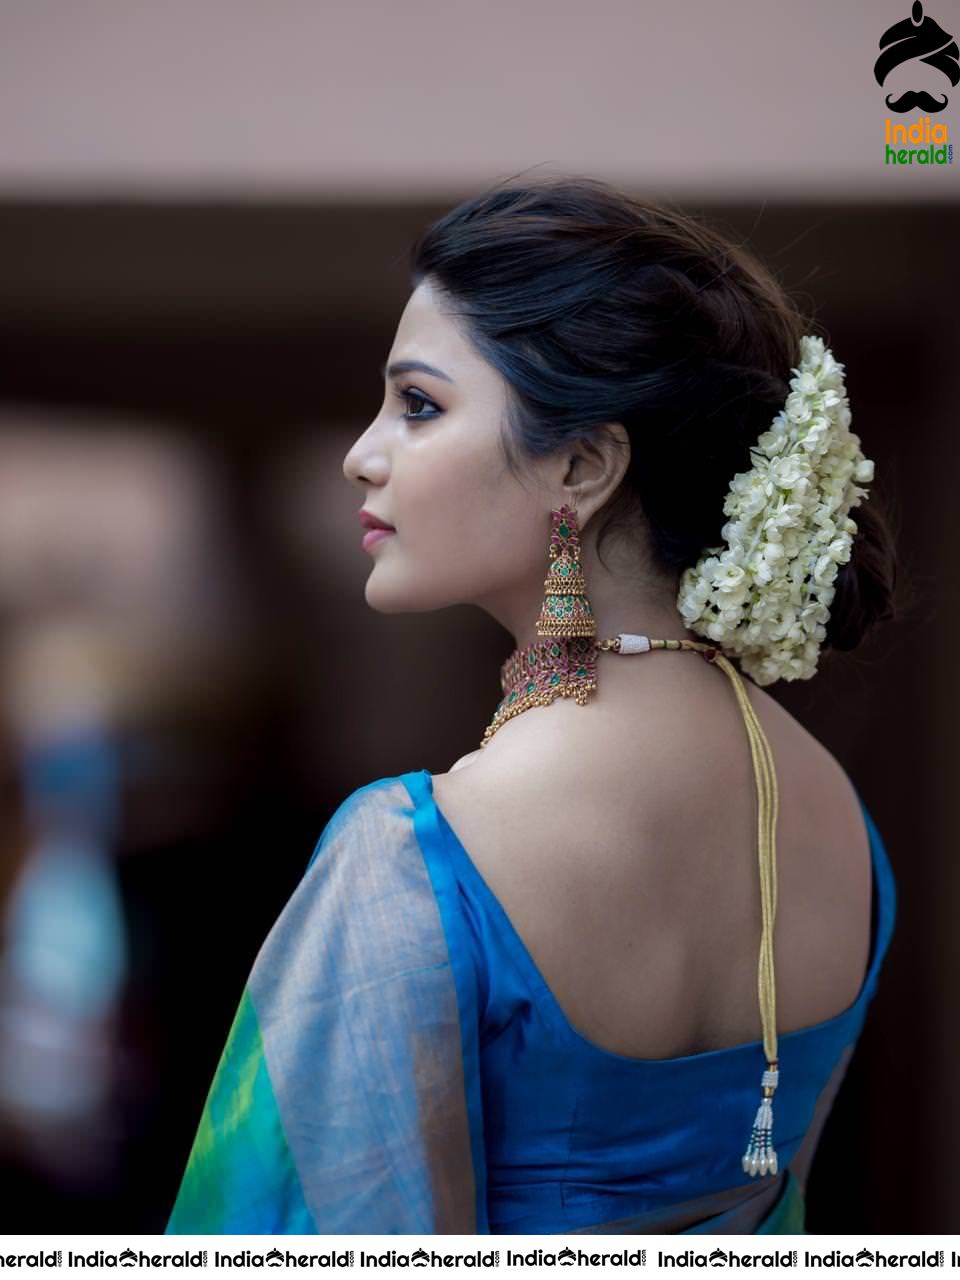 Aathmika is too gorgeous and traditional in Saree